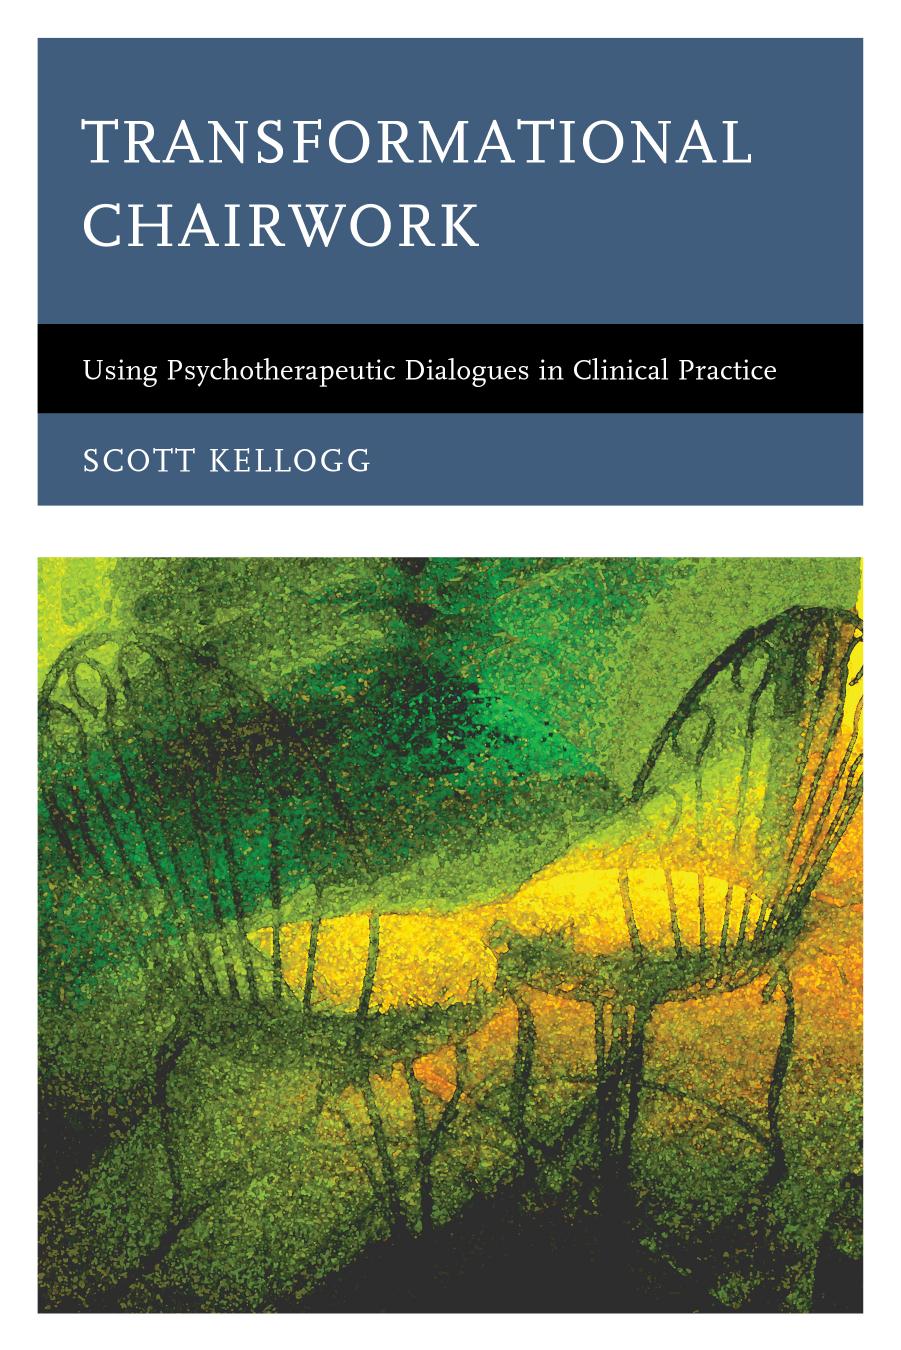 Transformational Chairwork: Using Psychotherapeutic Dialogues in Clinical Practice by Scott Kellogg